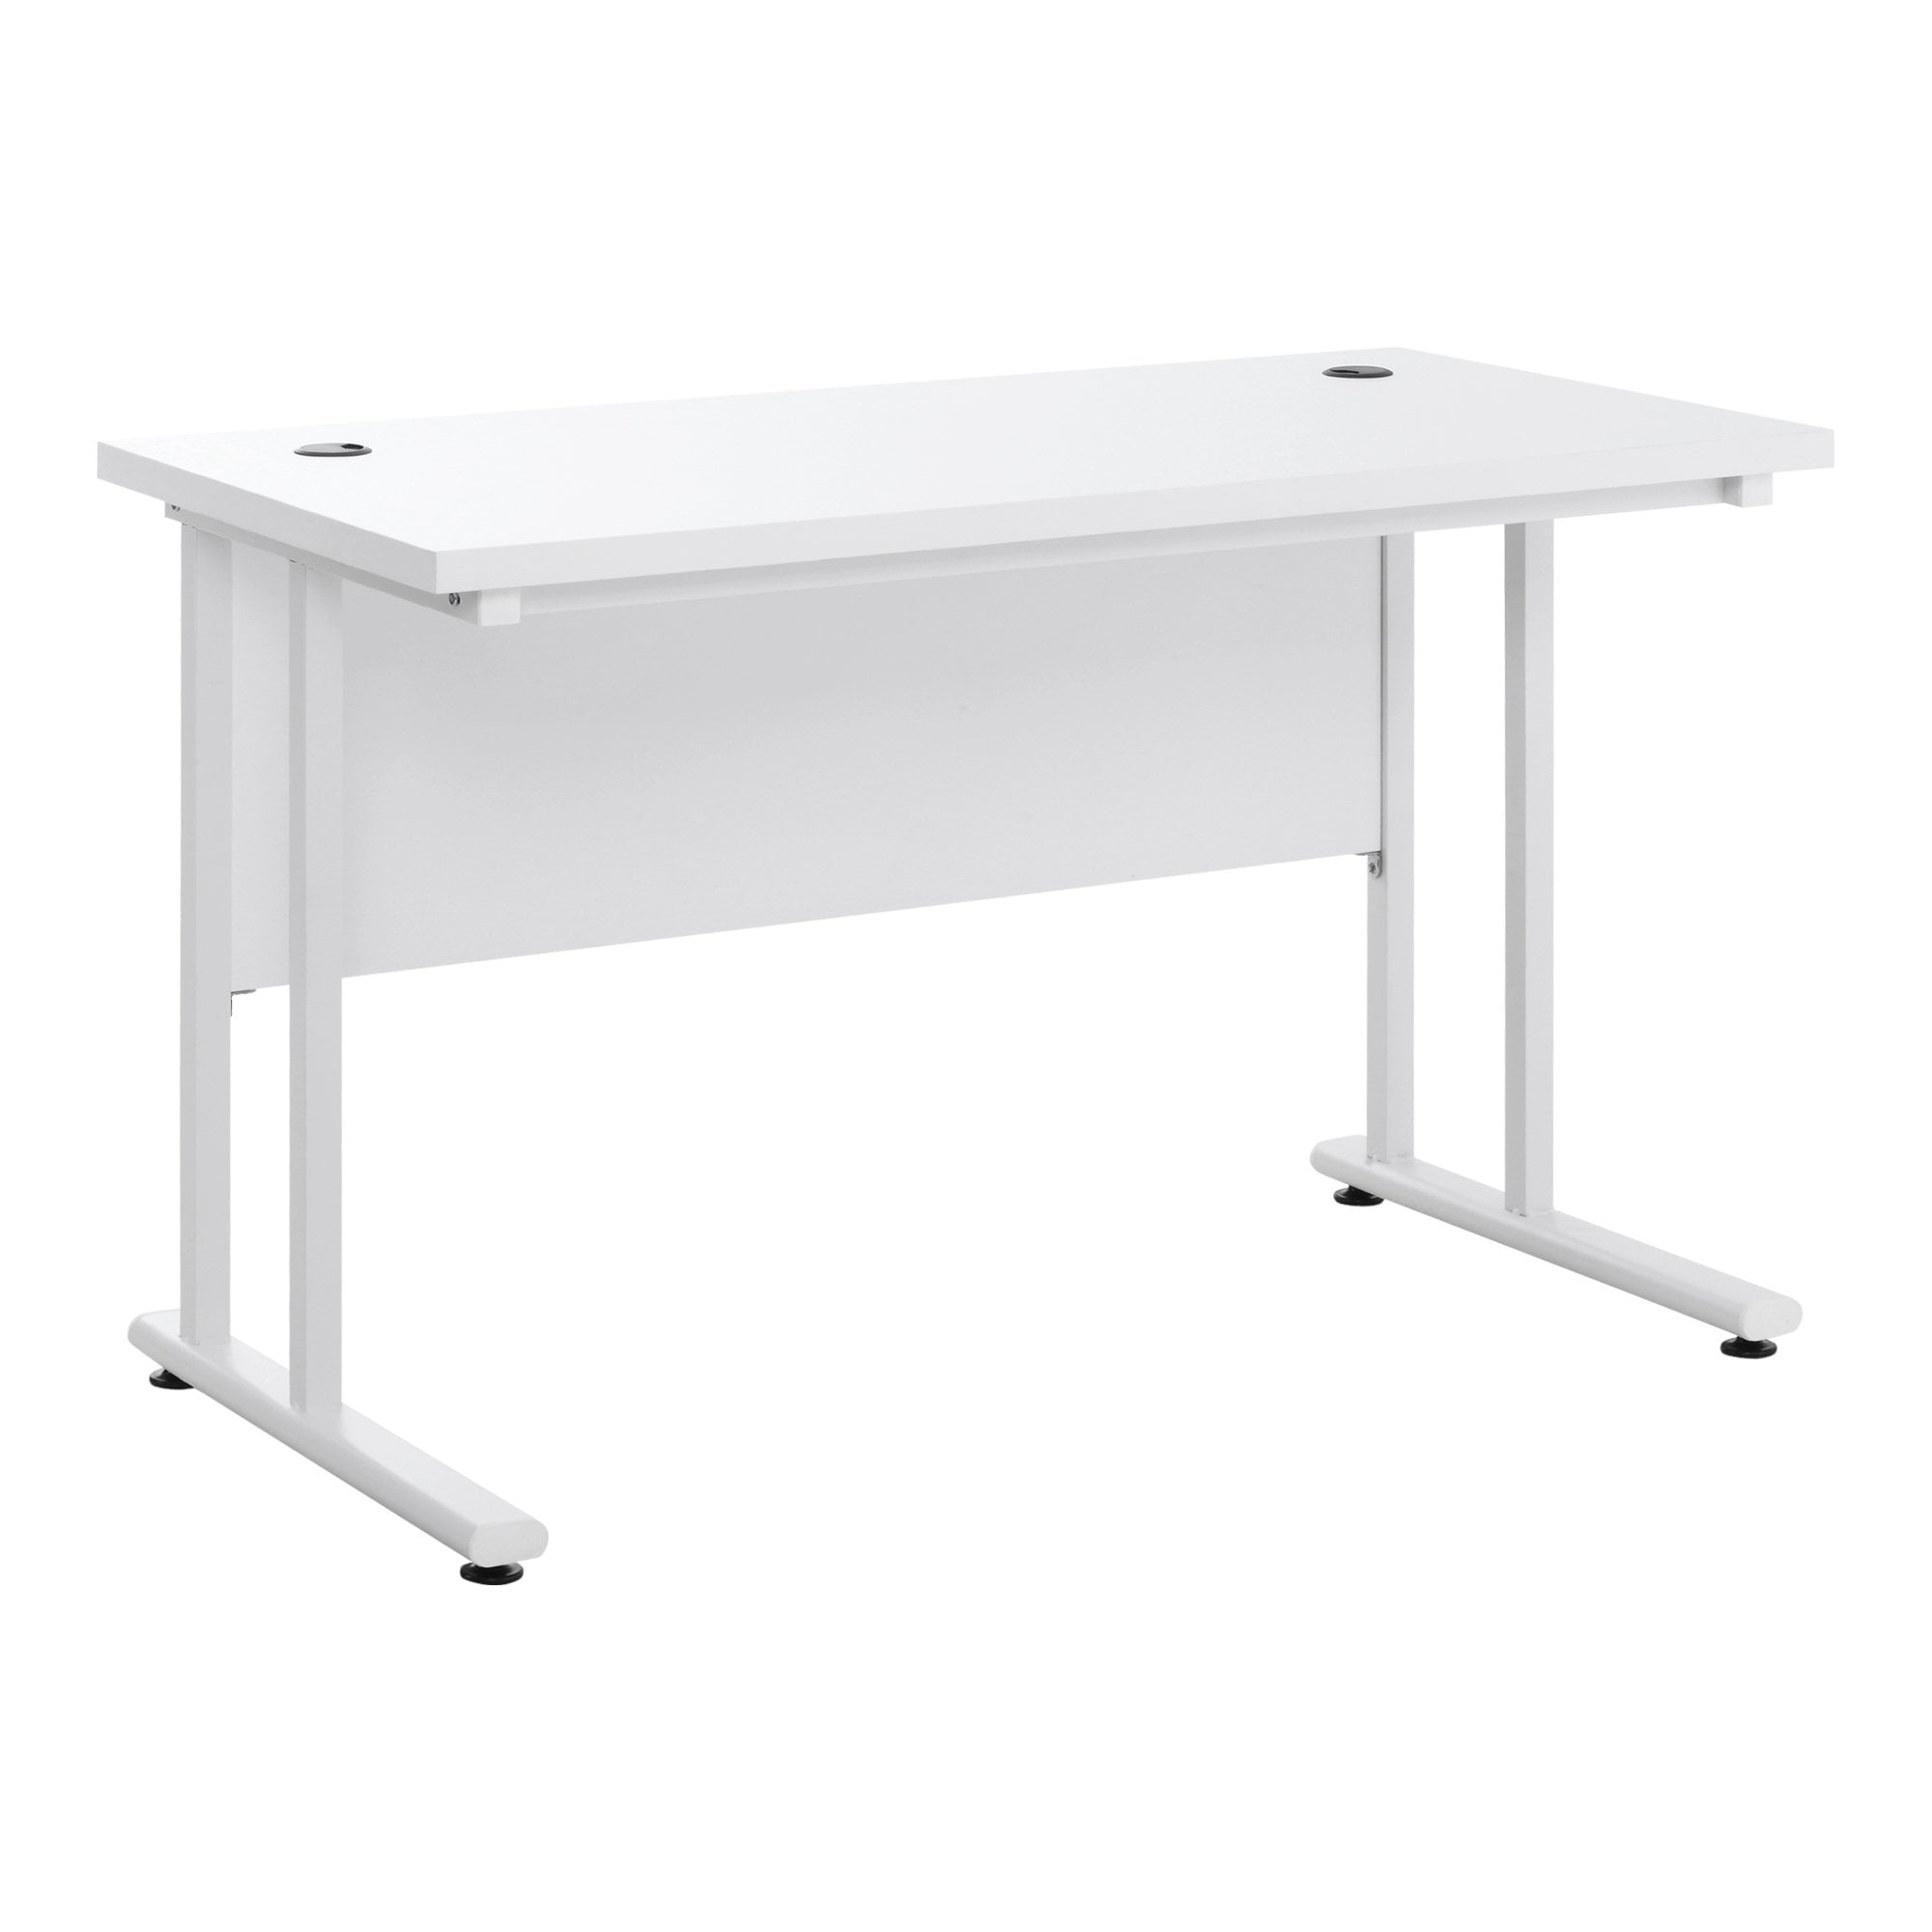 Computer Desk - Home Office Desk - Writing Table - 120x60x75cm Laptop Workstation with 2 Cable Management Holes - C Shaped Metal Legs for Adults and K